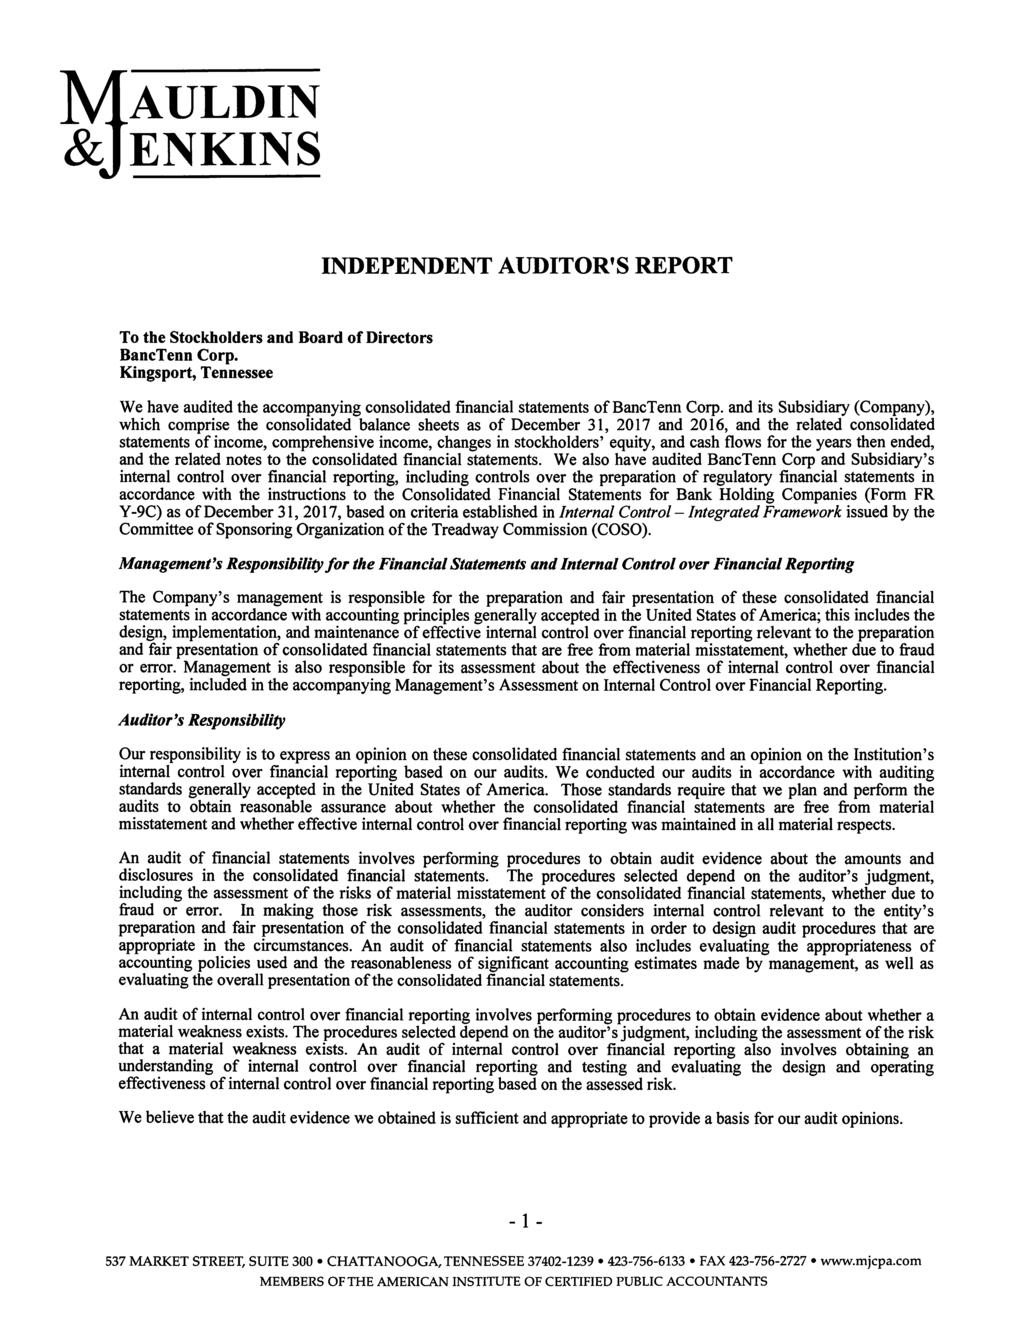 INDEPENDENT AUDITOR'S REPORT To the Stockholders and Board of Directors BancTenn Corp. Kingsport, Tennessee We have audited the accompanying consolidated financial statements ofbanctenn Corp.